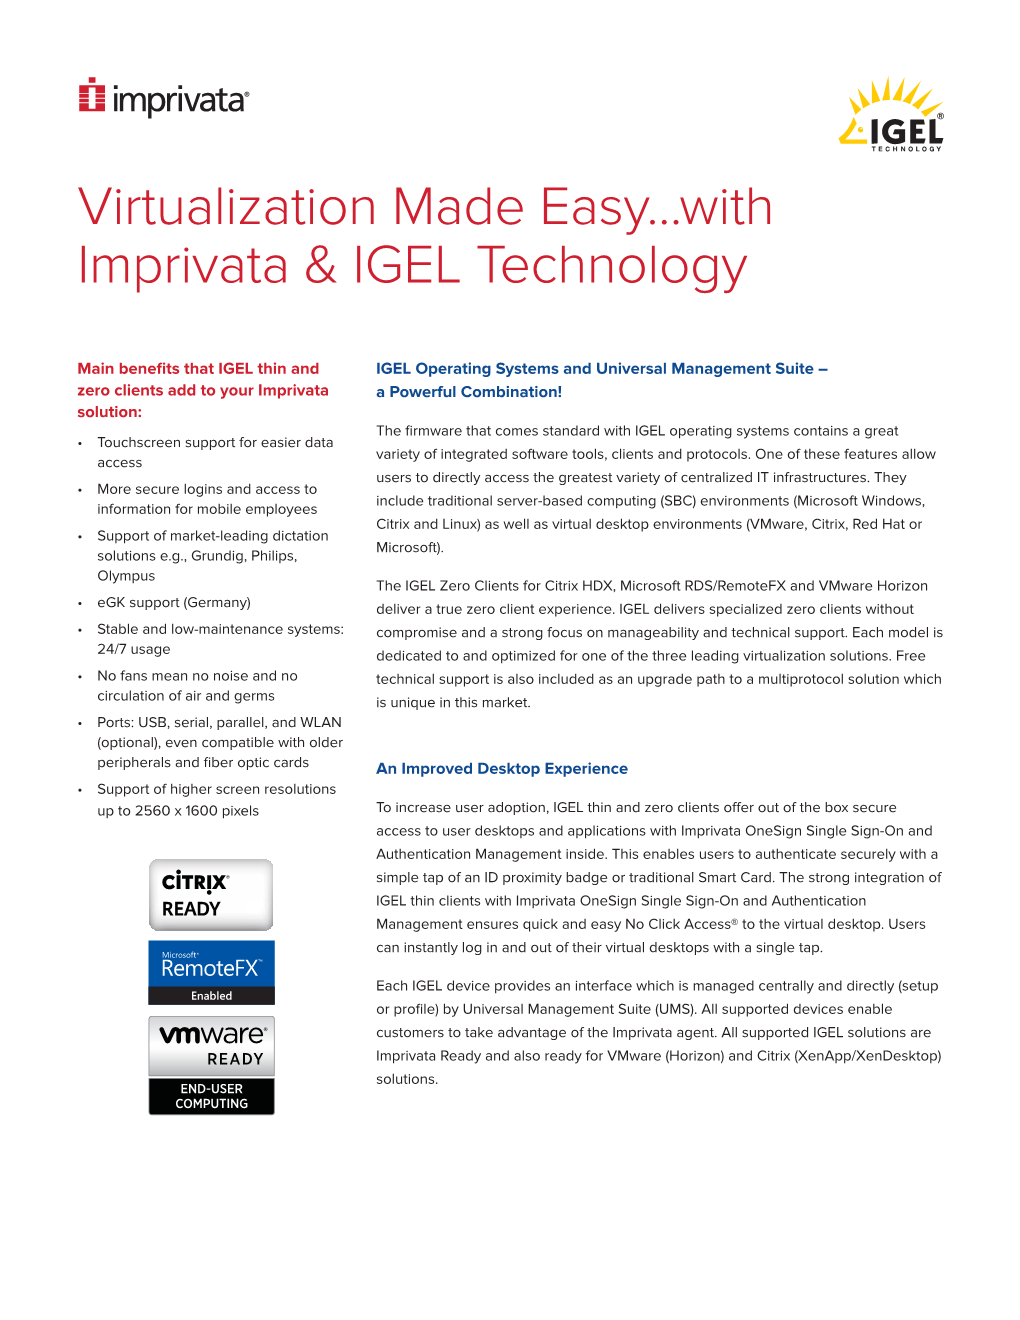 Virtualization Made Easy...With Imprivata & IGEL Technology